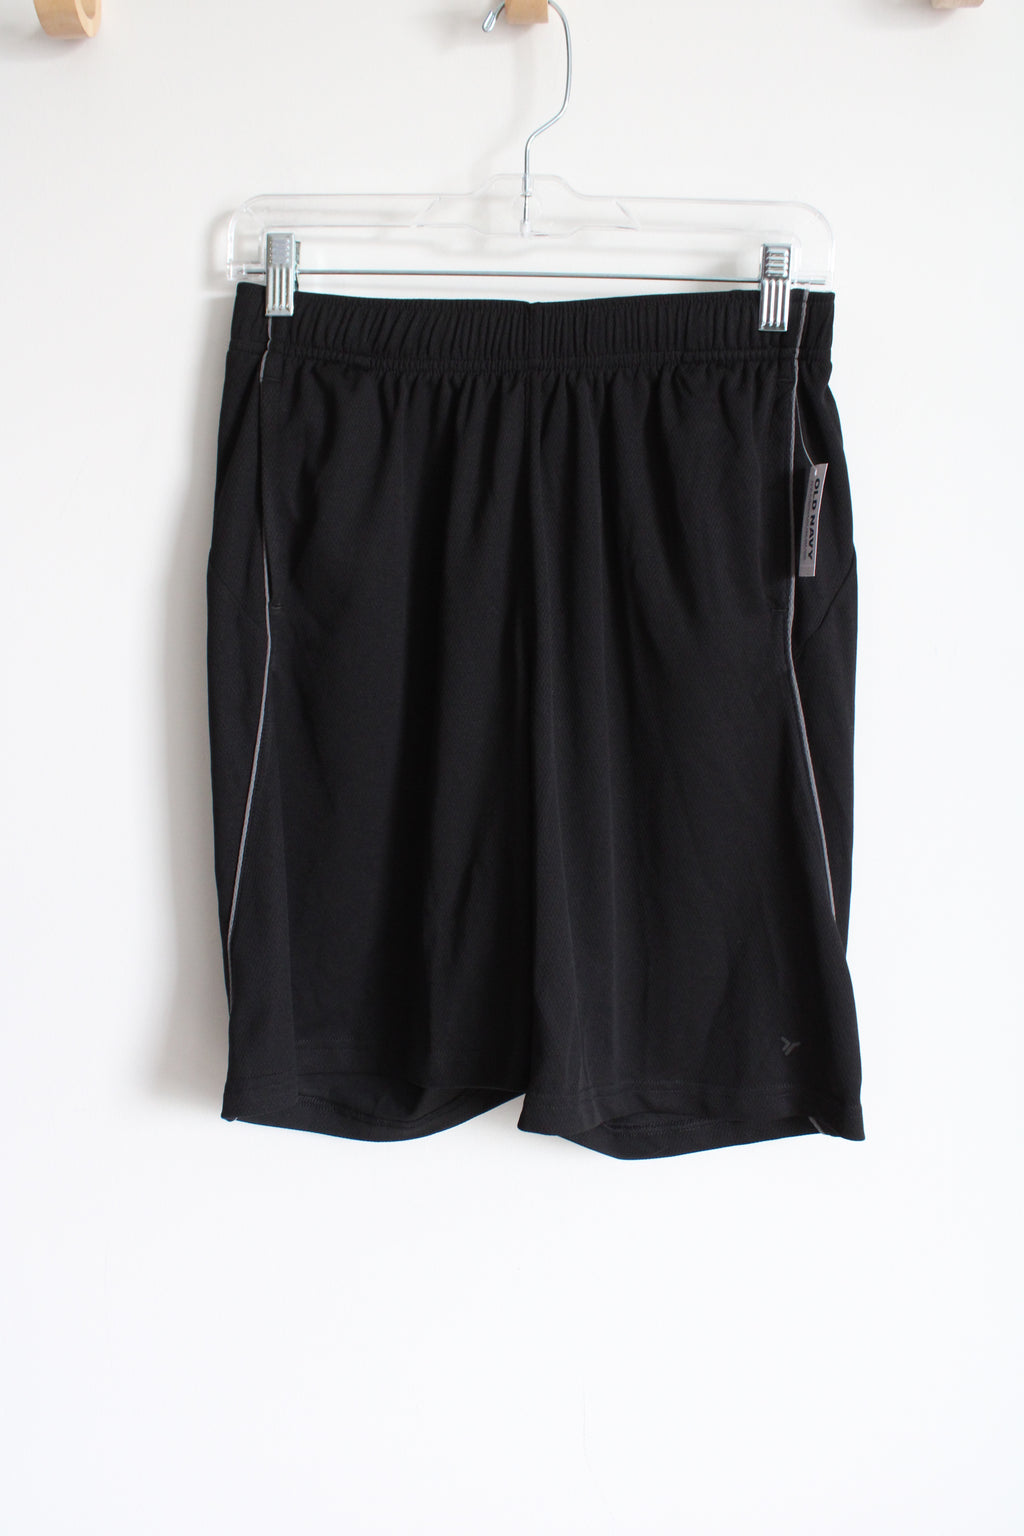 NEW Old Navy Active Black Shorts | Youth XL (14/16)